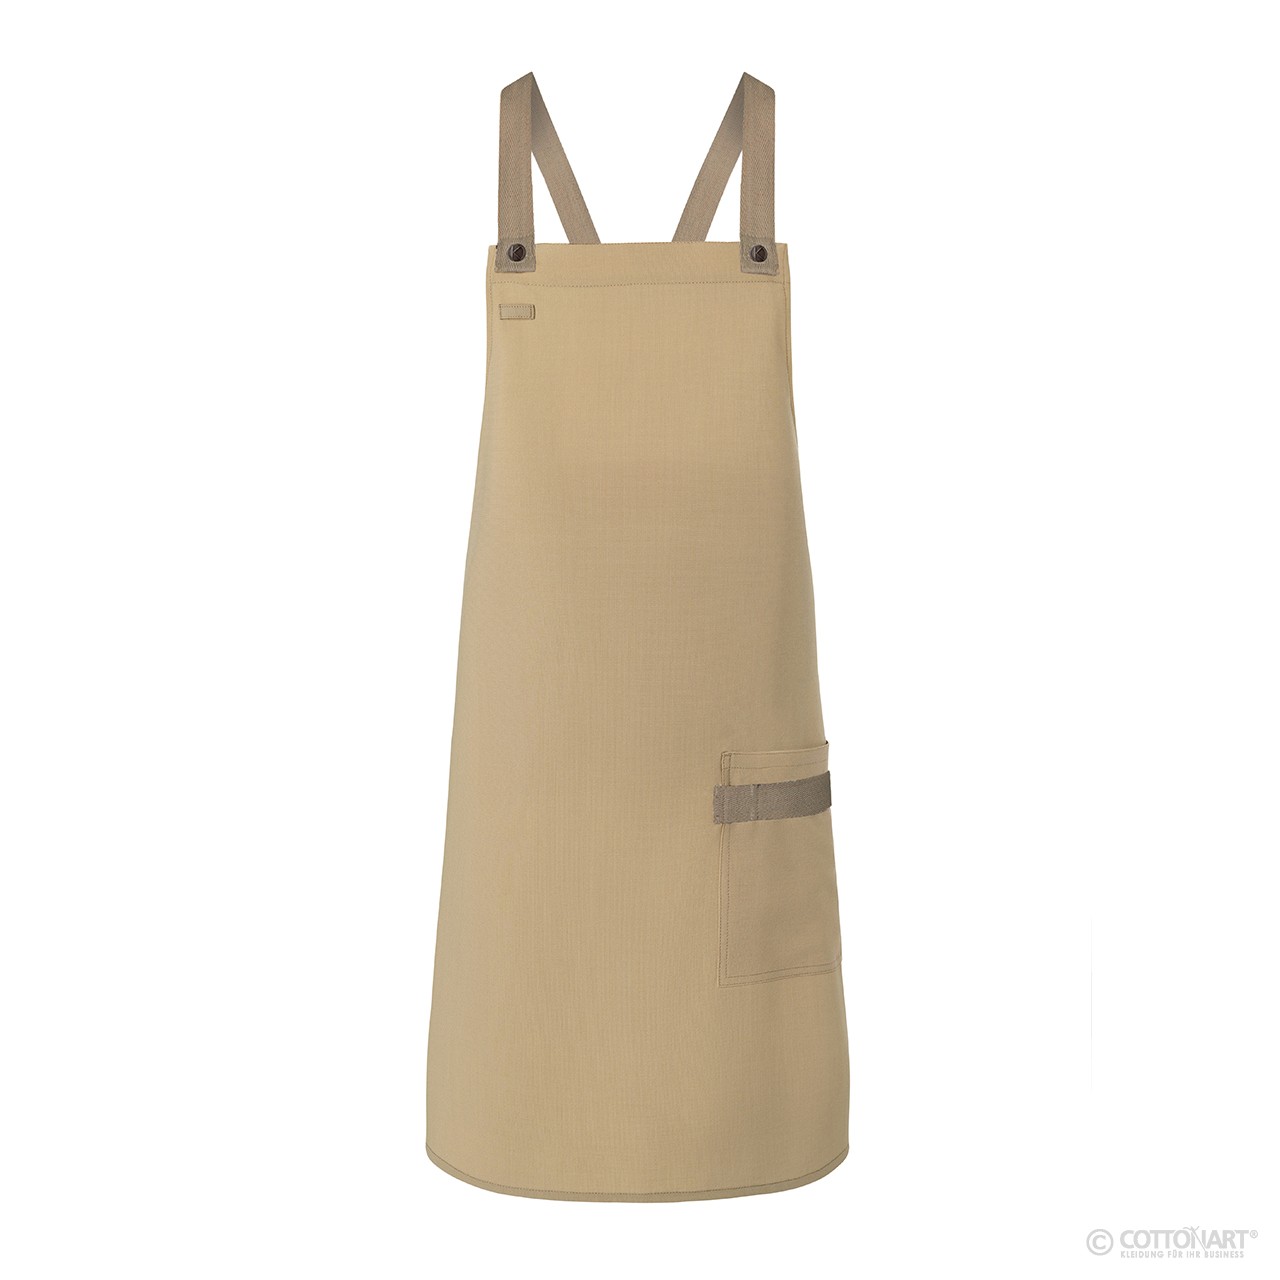 Bib apron URBAN-LOOK with cross ribbons 85 x 70 cm Karlowsky® pebble gray One Size